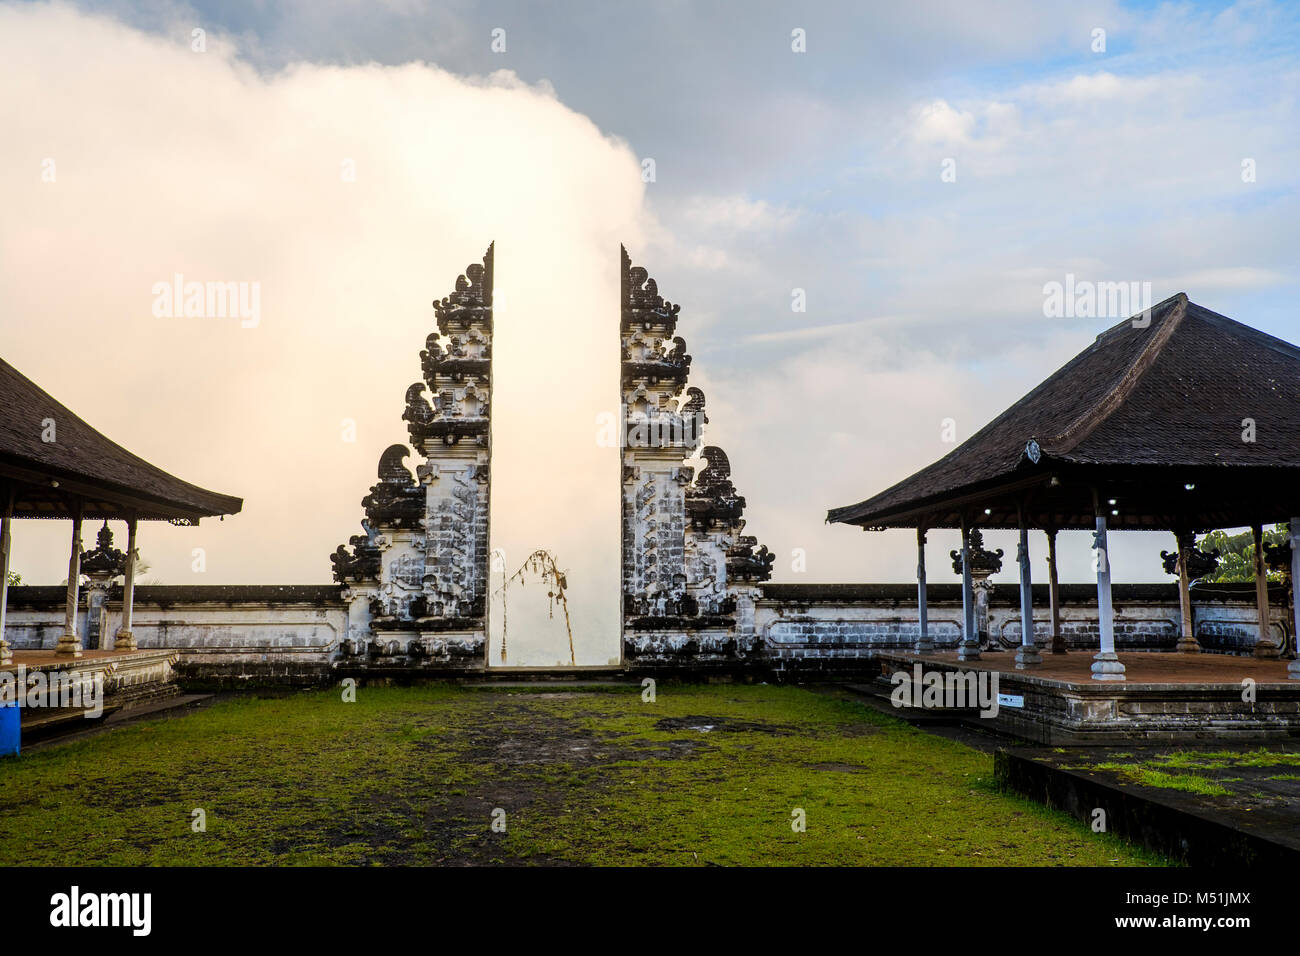 Clouds hinder the view through the split gateway ('candi bentar') of the outer sanctum, Pura Lempuyang temple, Bali, Indonesia. Stock Photo